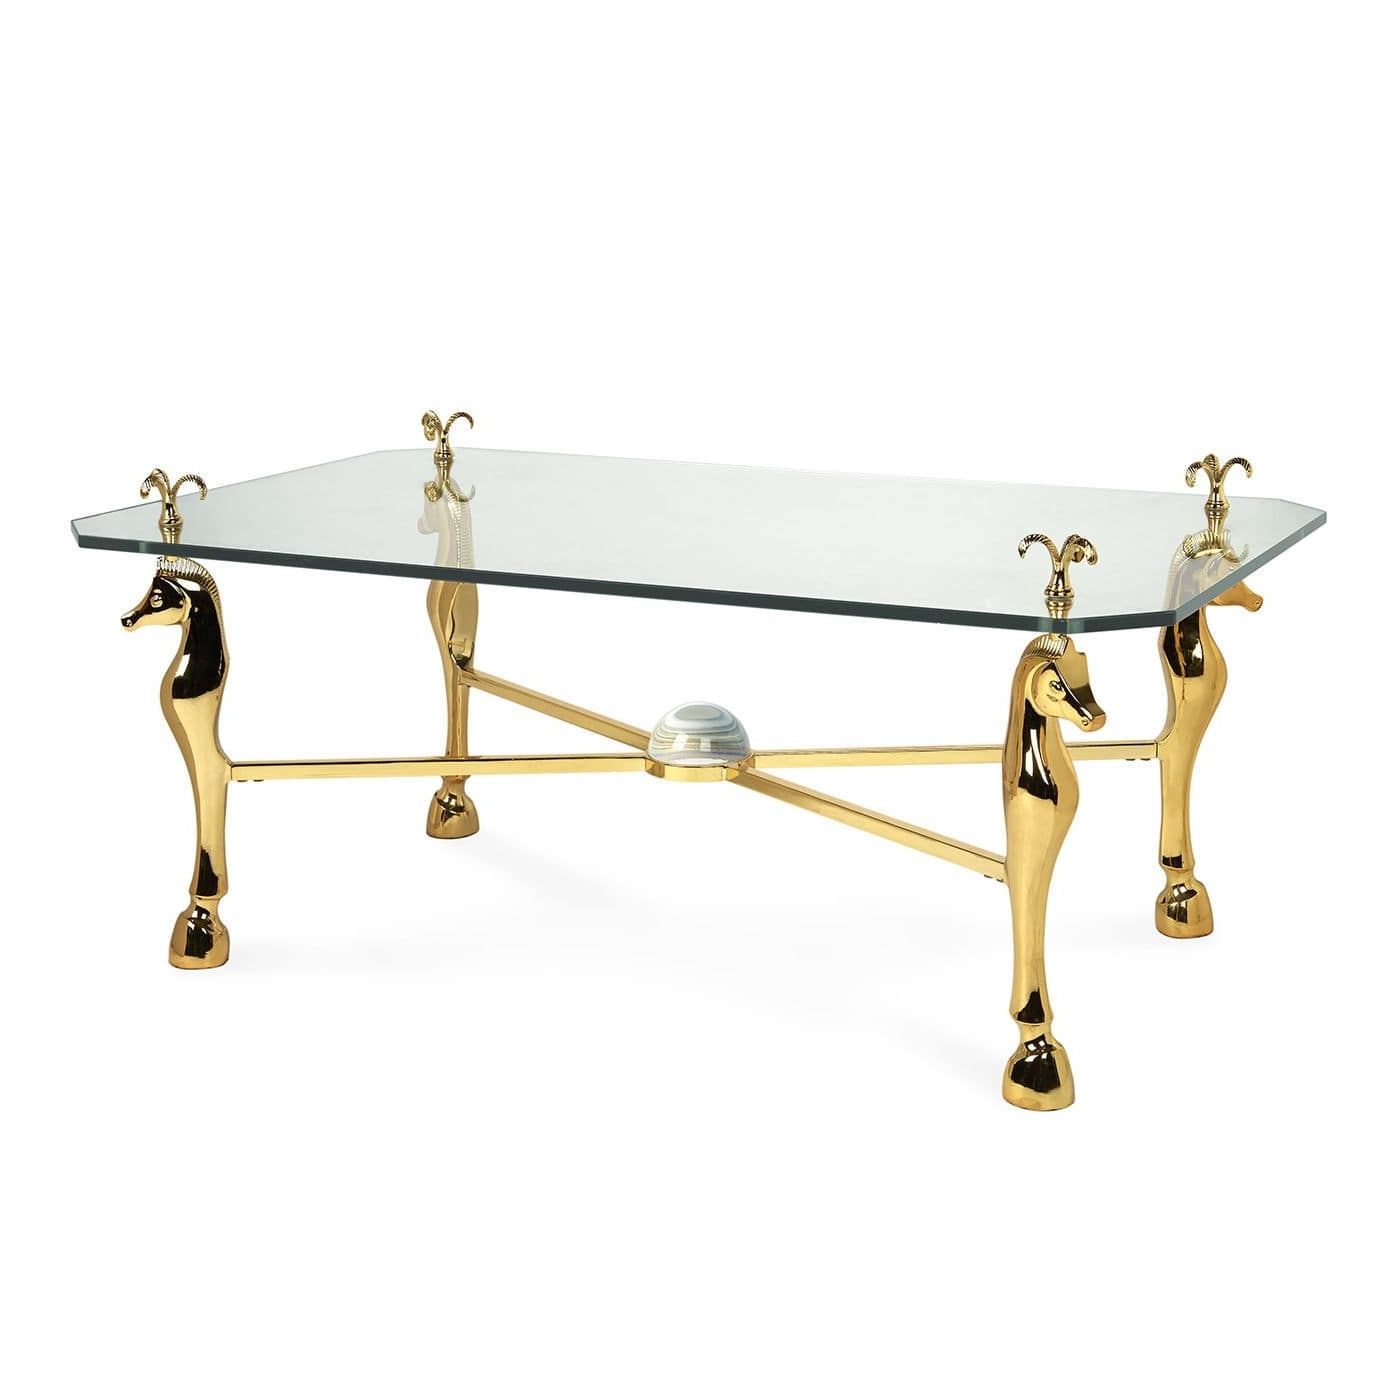 French Style Coffee Table / Tempered Glass / Polished Brass Inside Widely Used Acrylic Glass And Brass Coffee Tables (View 12 of 20)